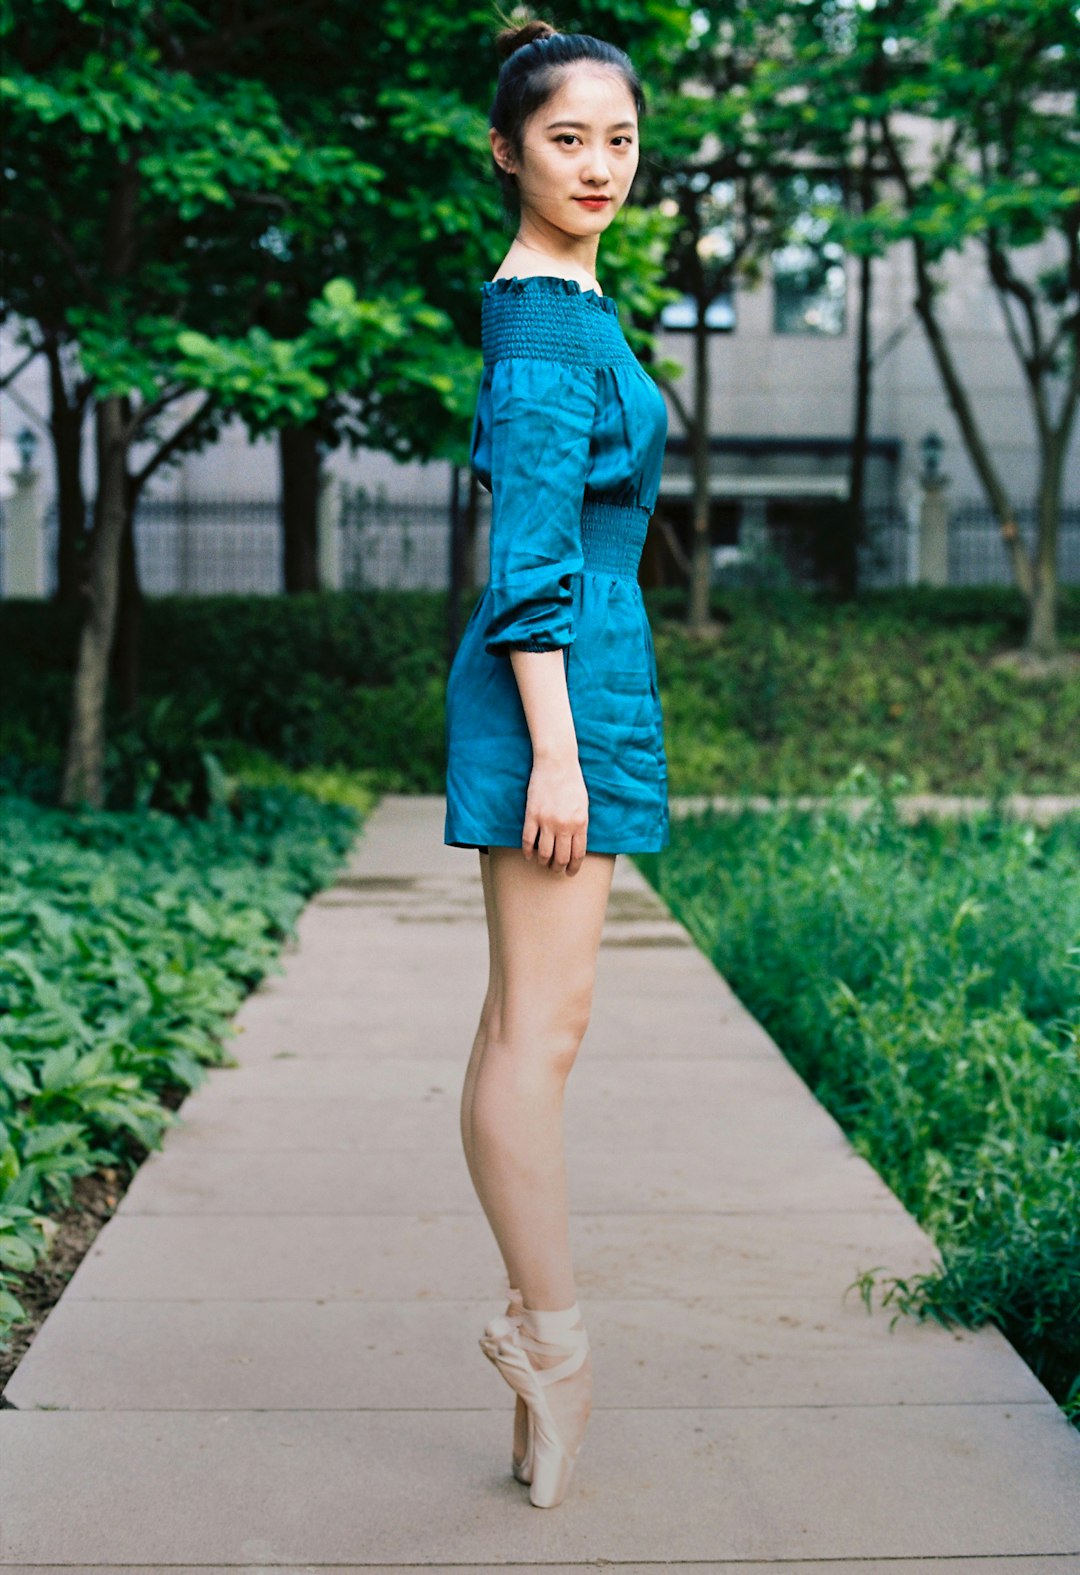 woman in blue denim jacket and blue skirt walking on pathway